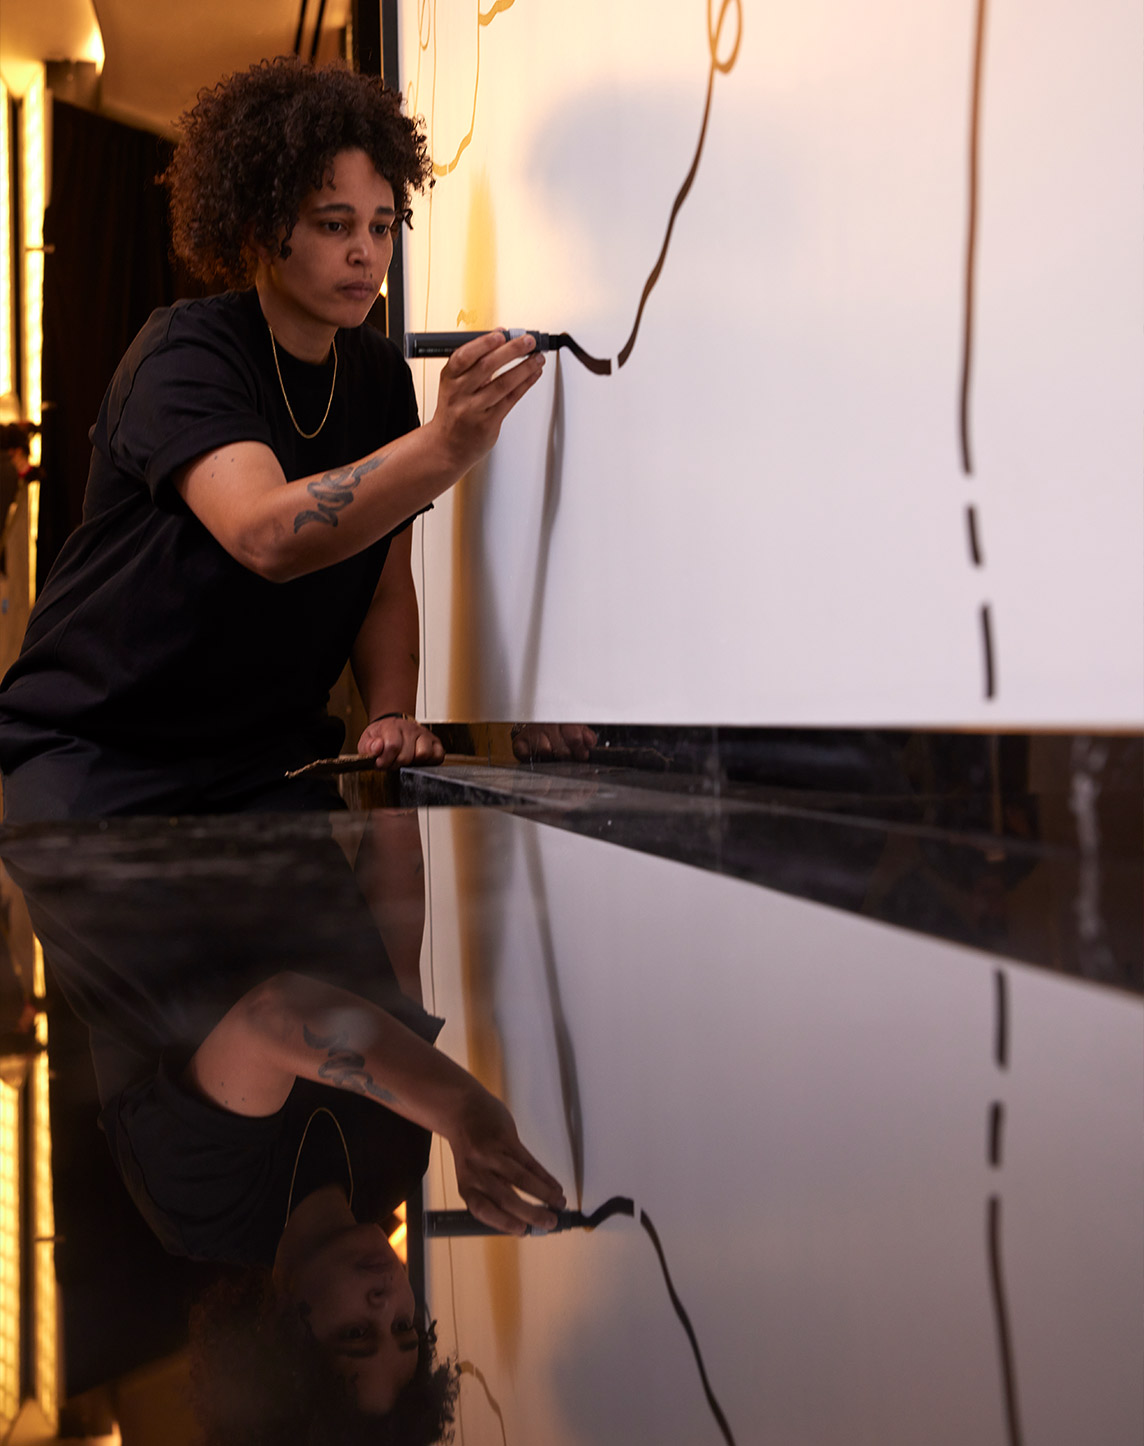 A person with curly hair is marking lines with a pen on large reflective sheets laid on a table, with their focused reflection visible on the glossy surface.